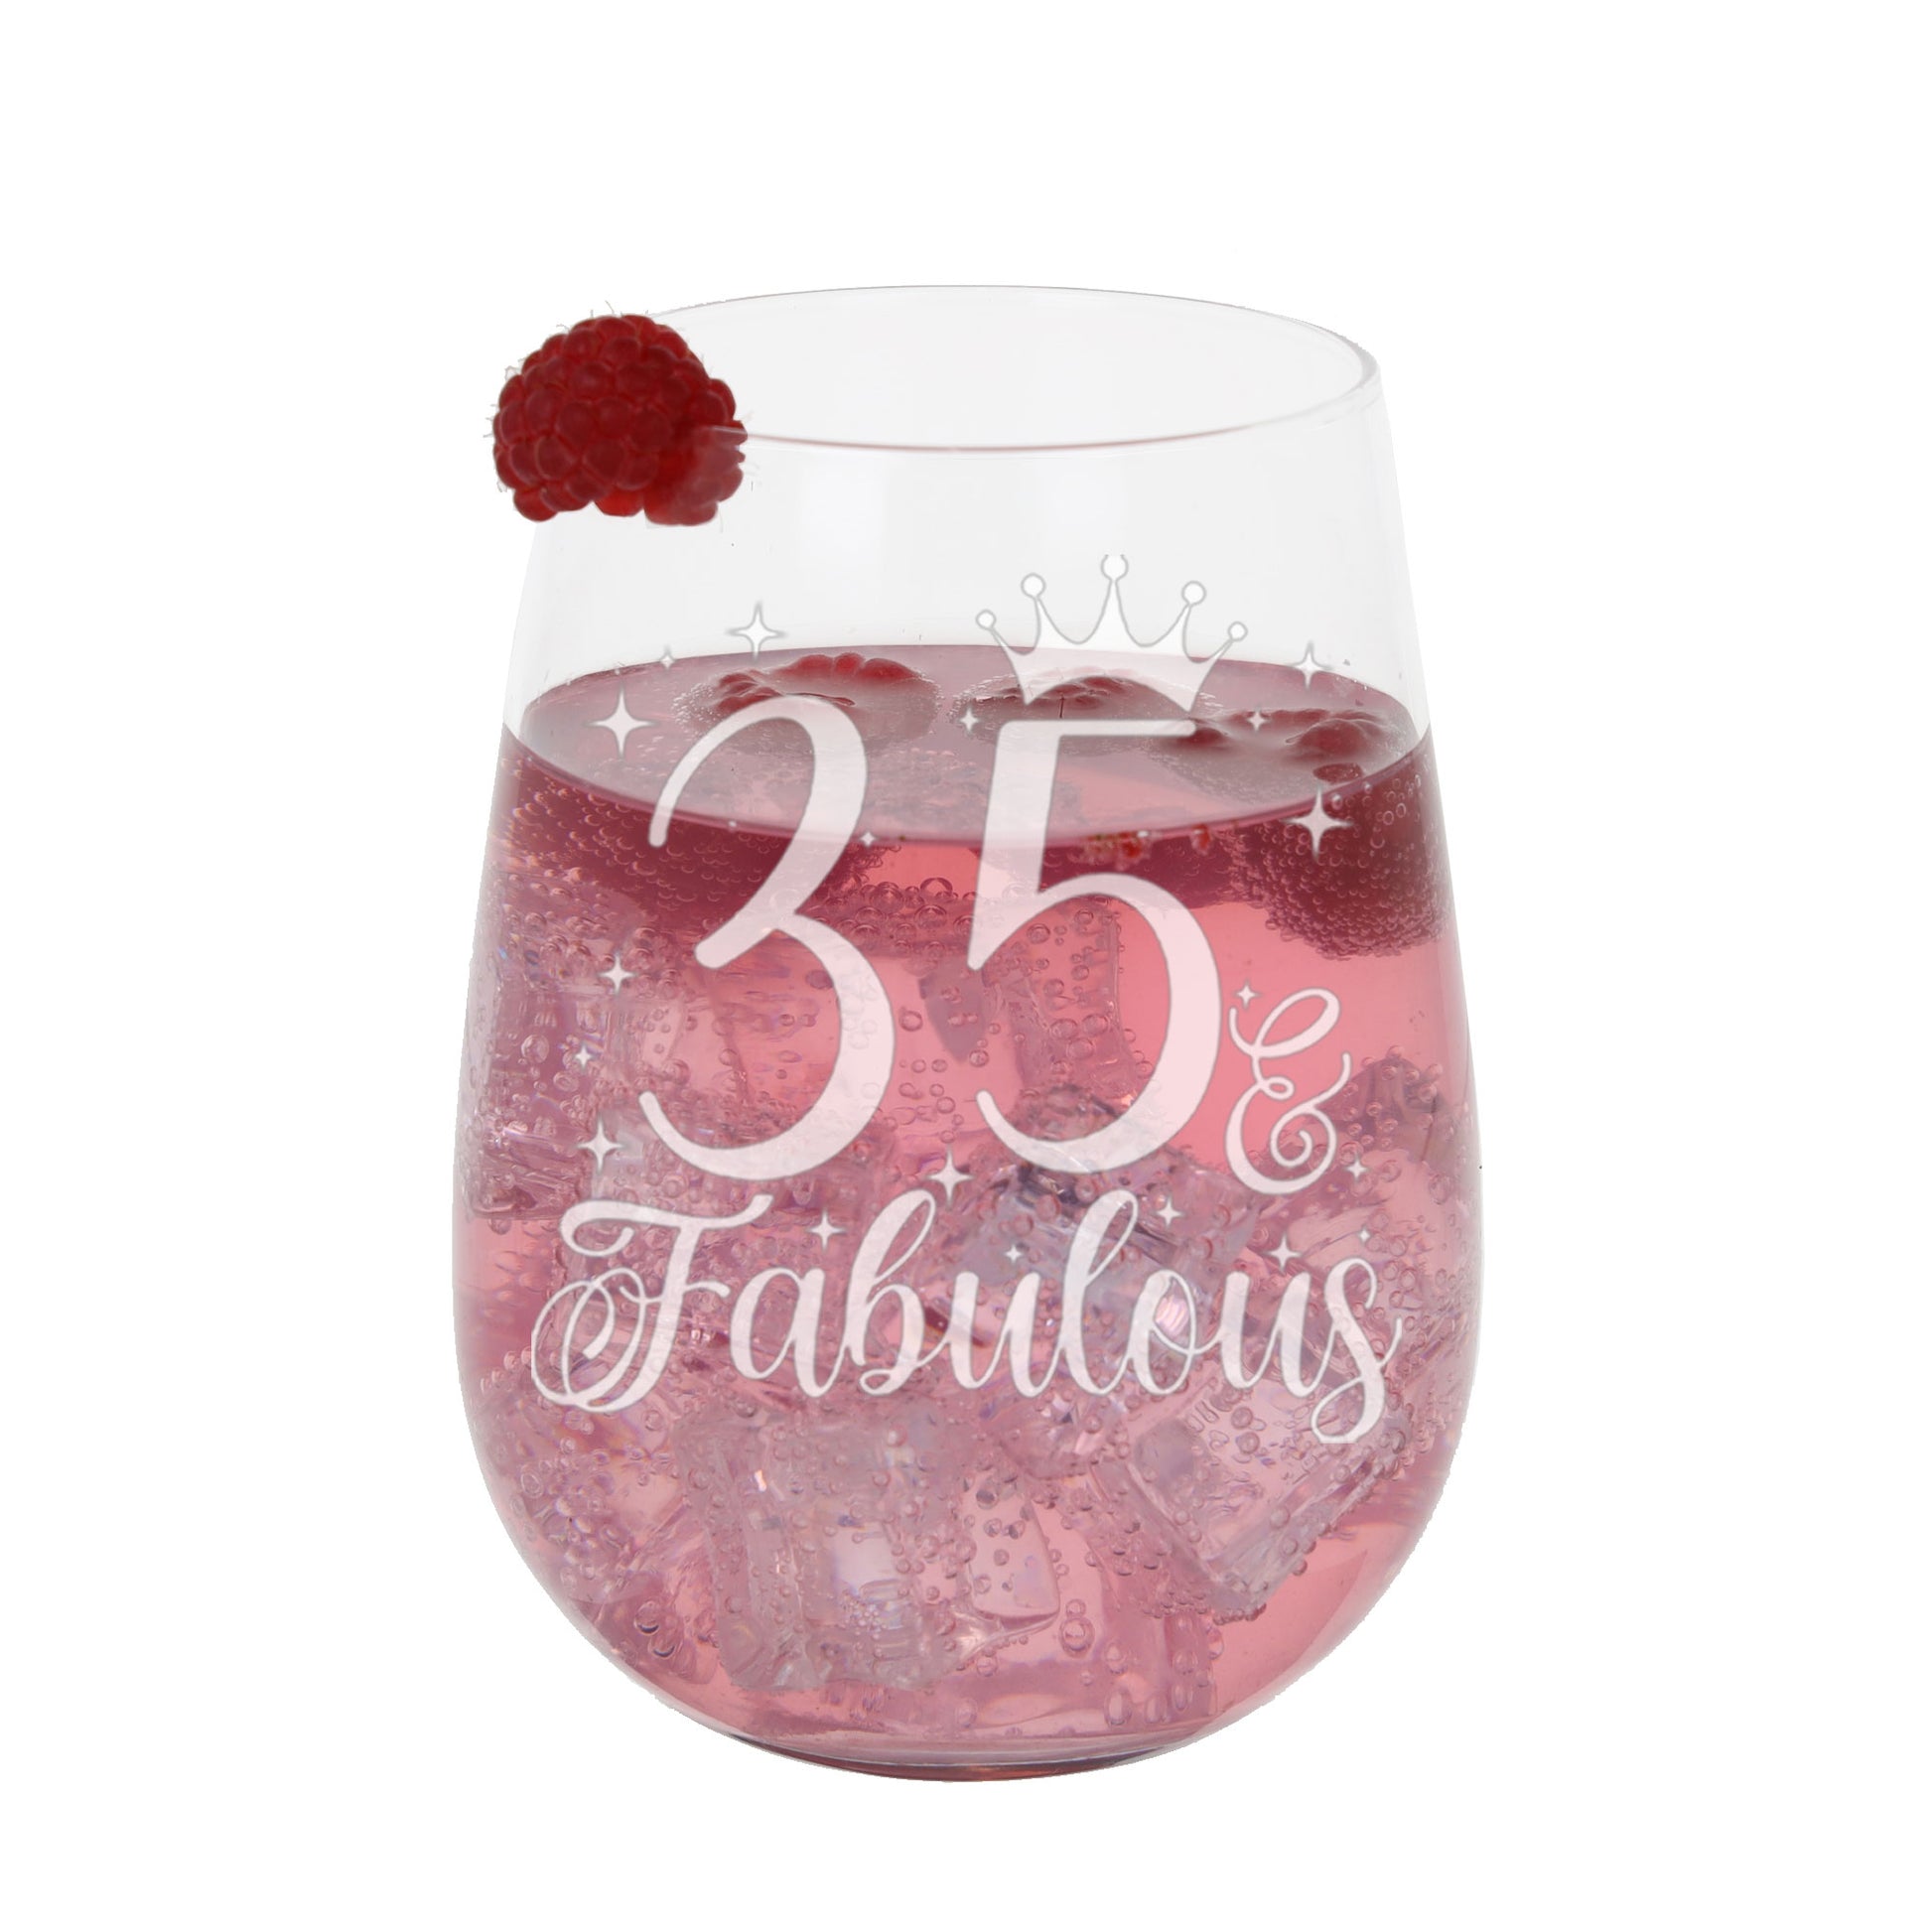 35 & Fabulous Engraved Stemless Gin Glass and/or Coaster Set  - Always Looking Good -   